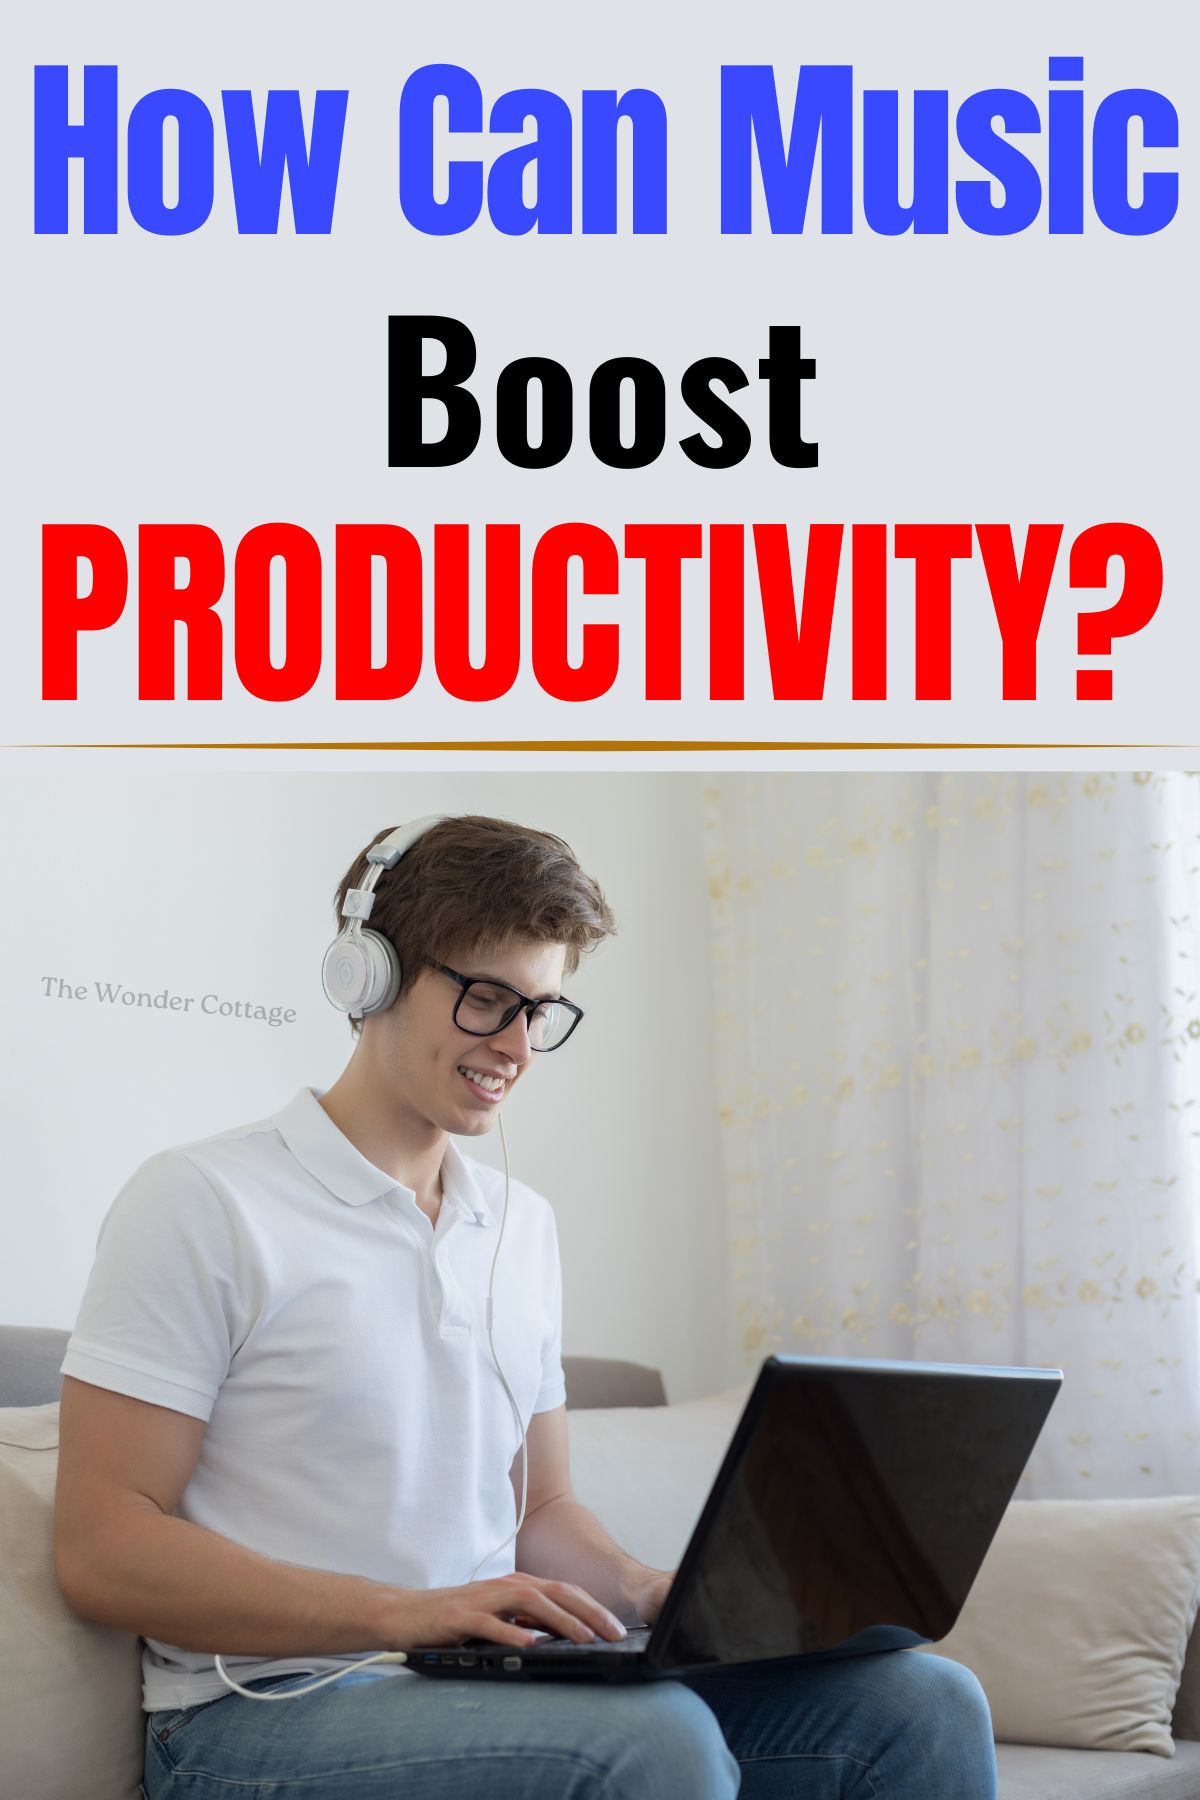 How Can Music Boost Productivity?